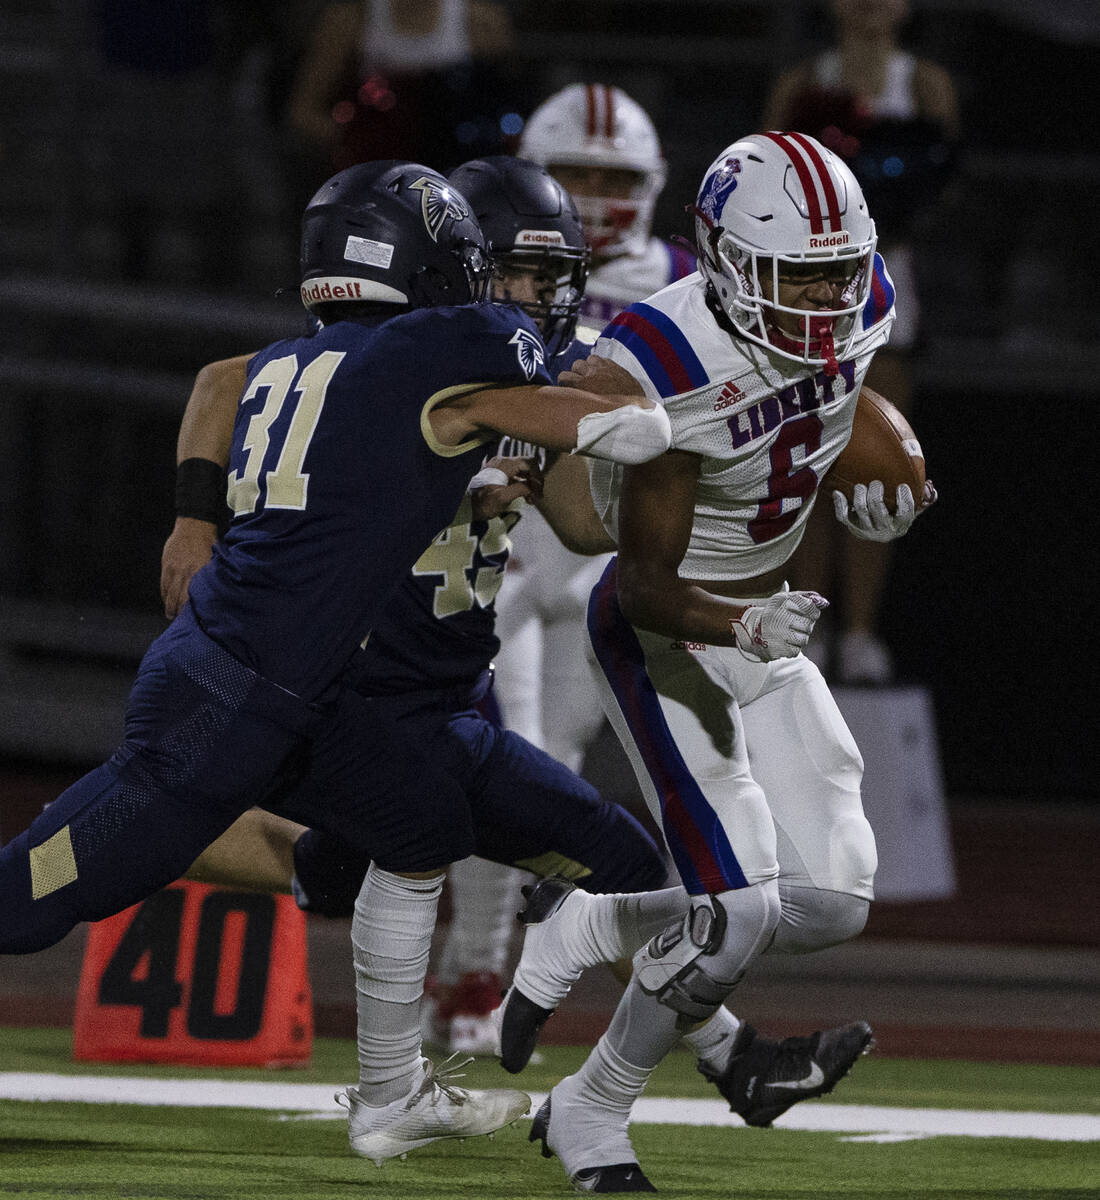 Liberty HighÕs wide receiver Marques Johnson (6) runs with the ball as Foothill HighÕ ...